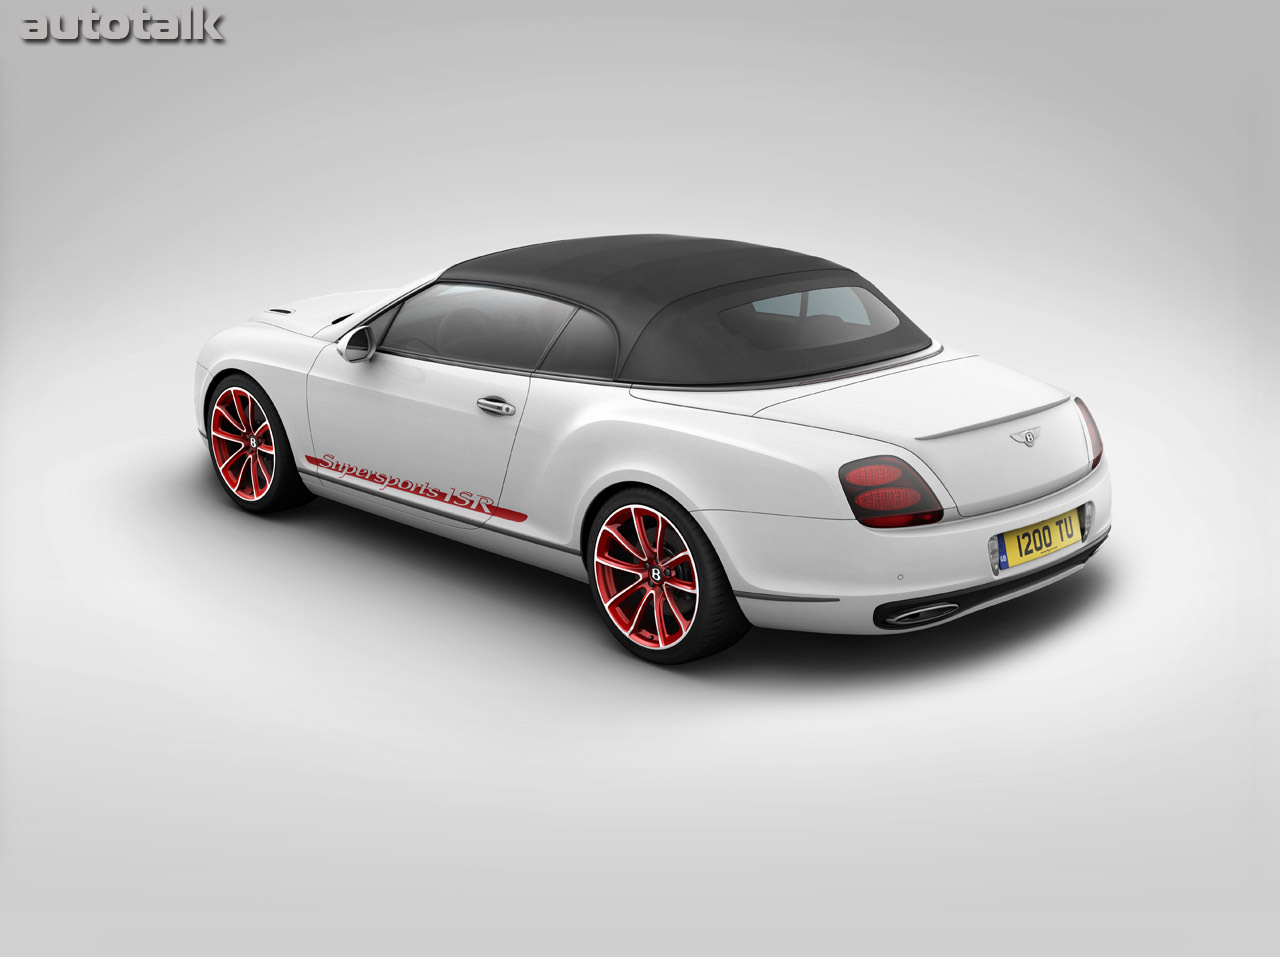 Bentley Continental Supersports Convertible ISR Mulliner